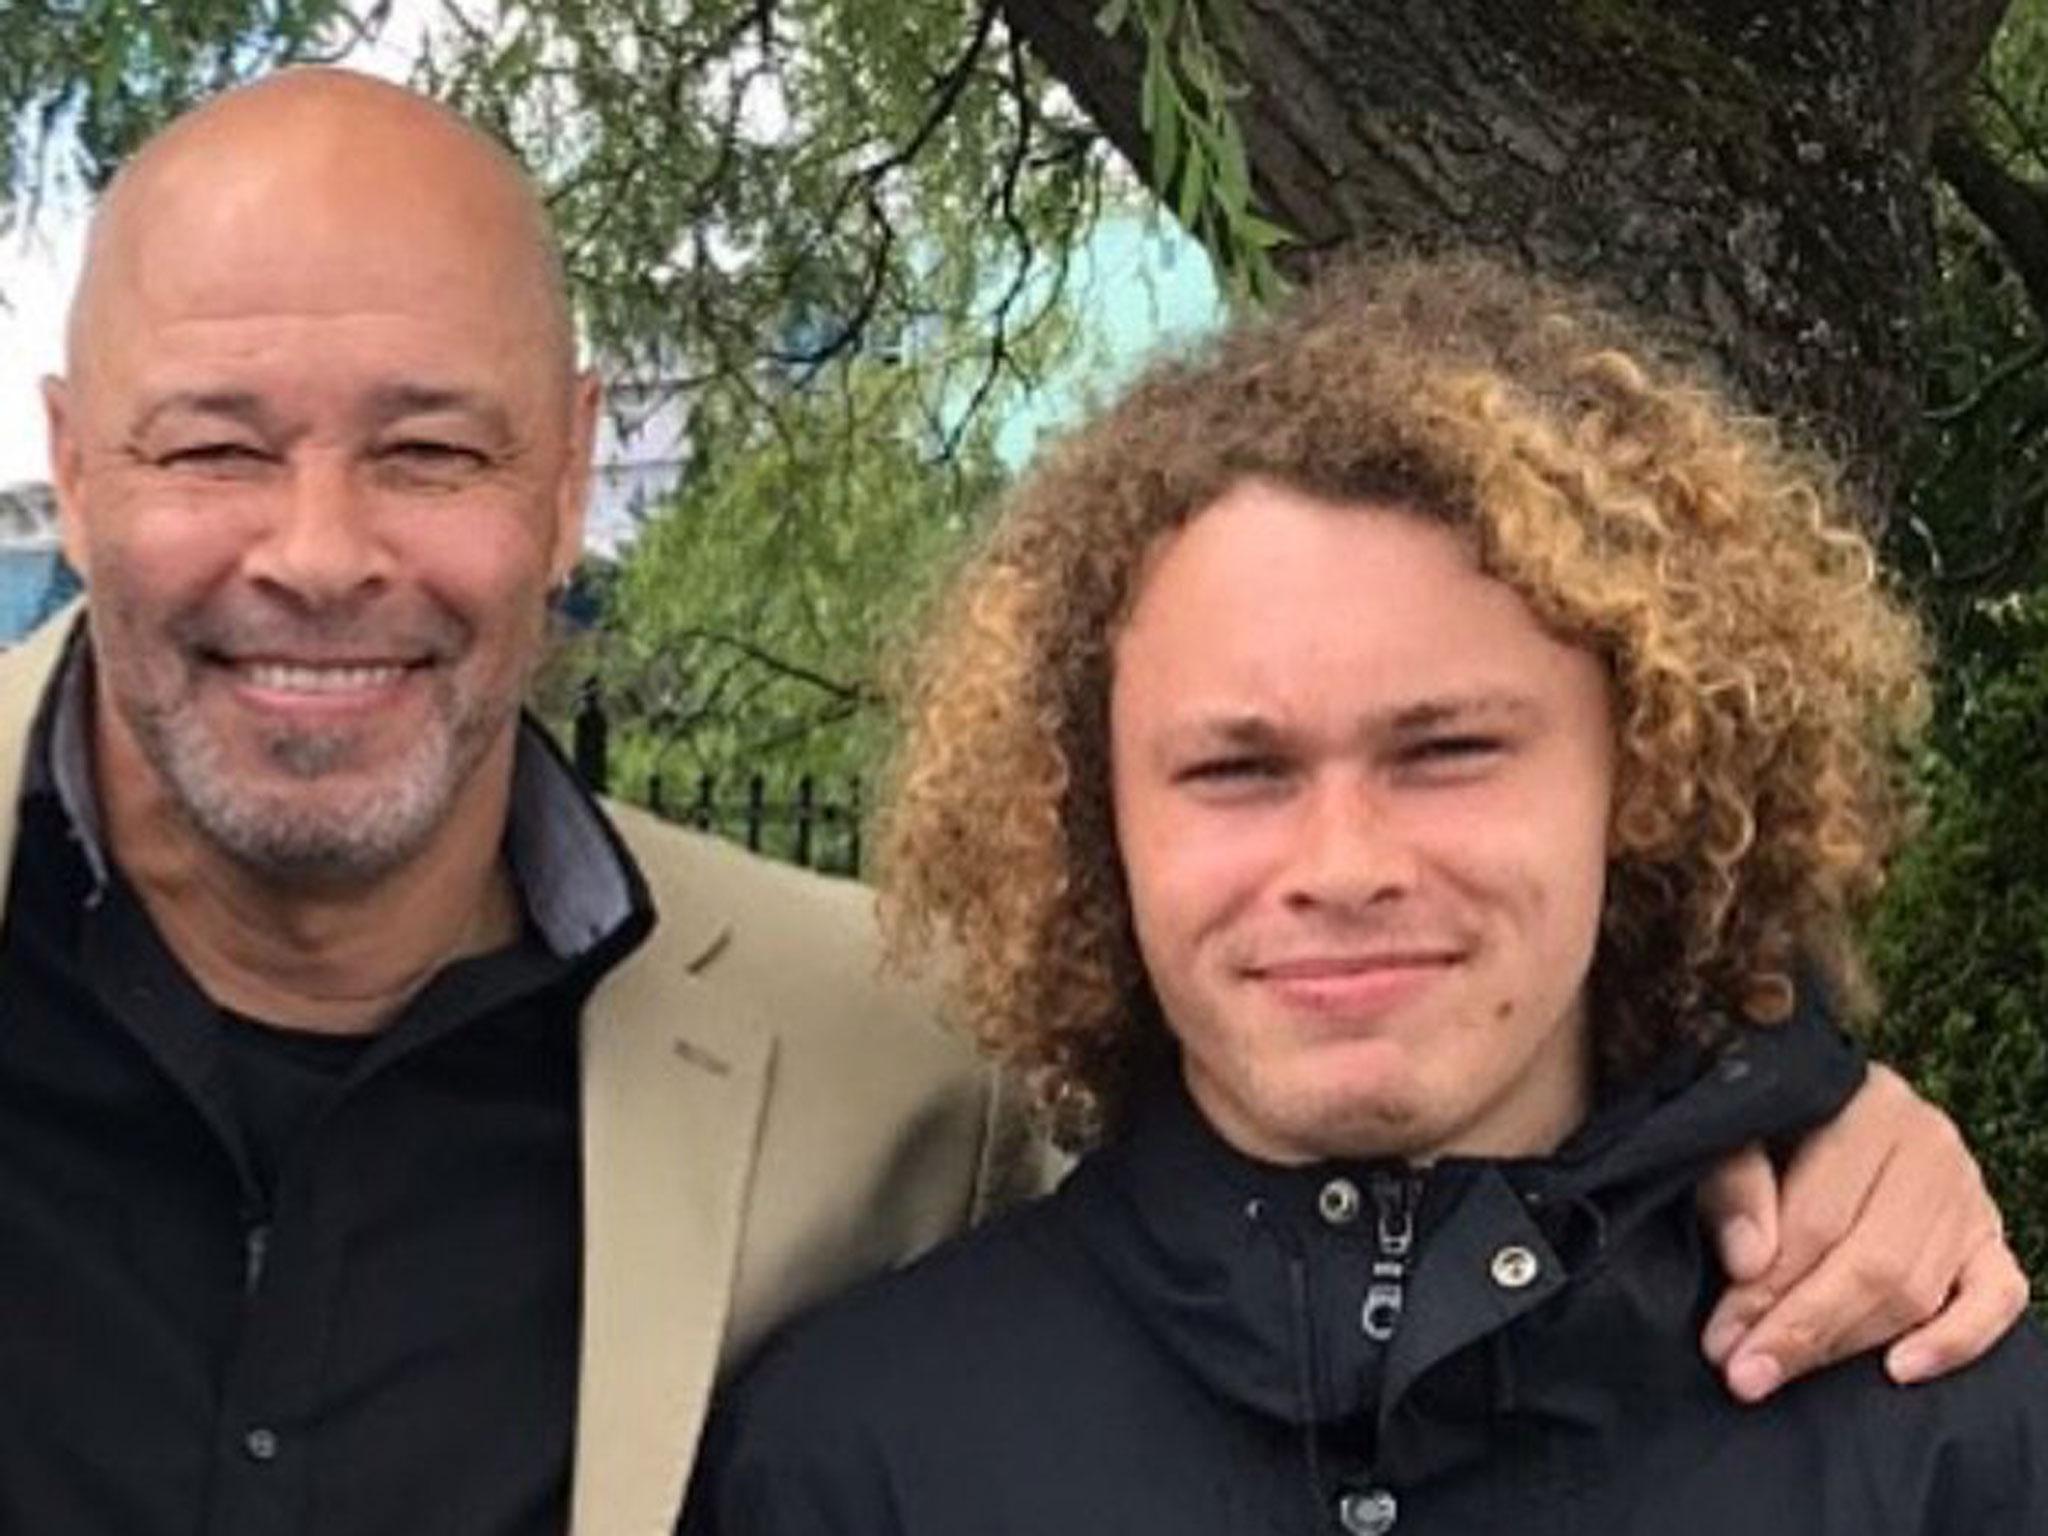 The ex-footballer shared an image of himself alongside his missing son on Twitter